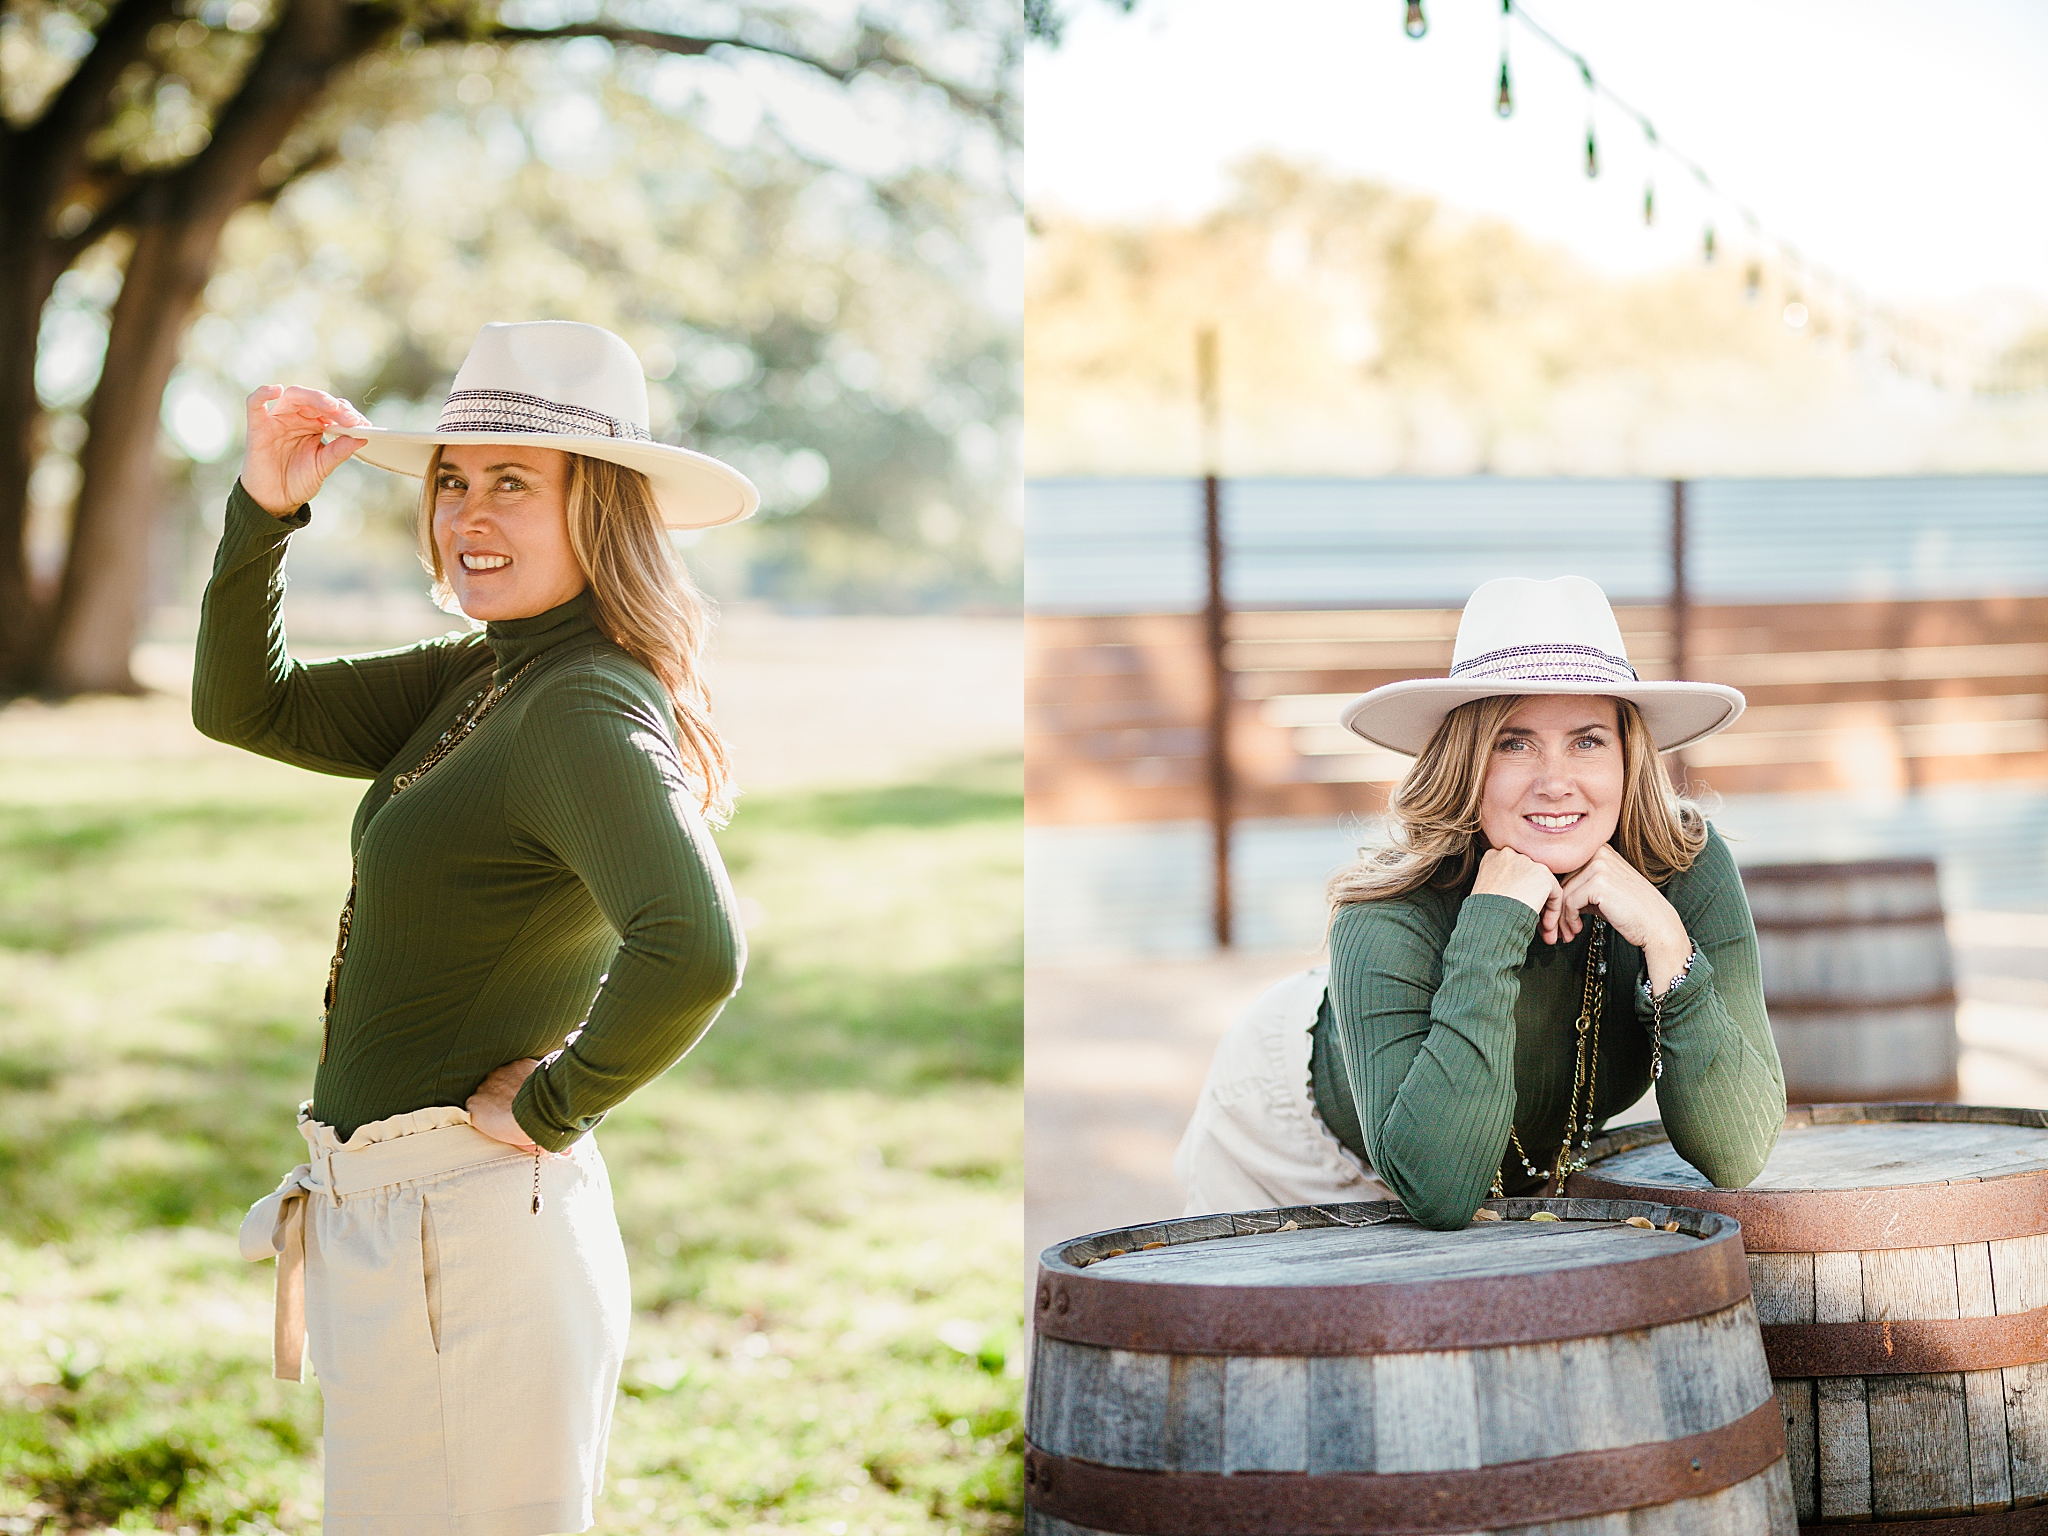 lady tips hat and leans on barrels by Ellie Chavez Photography